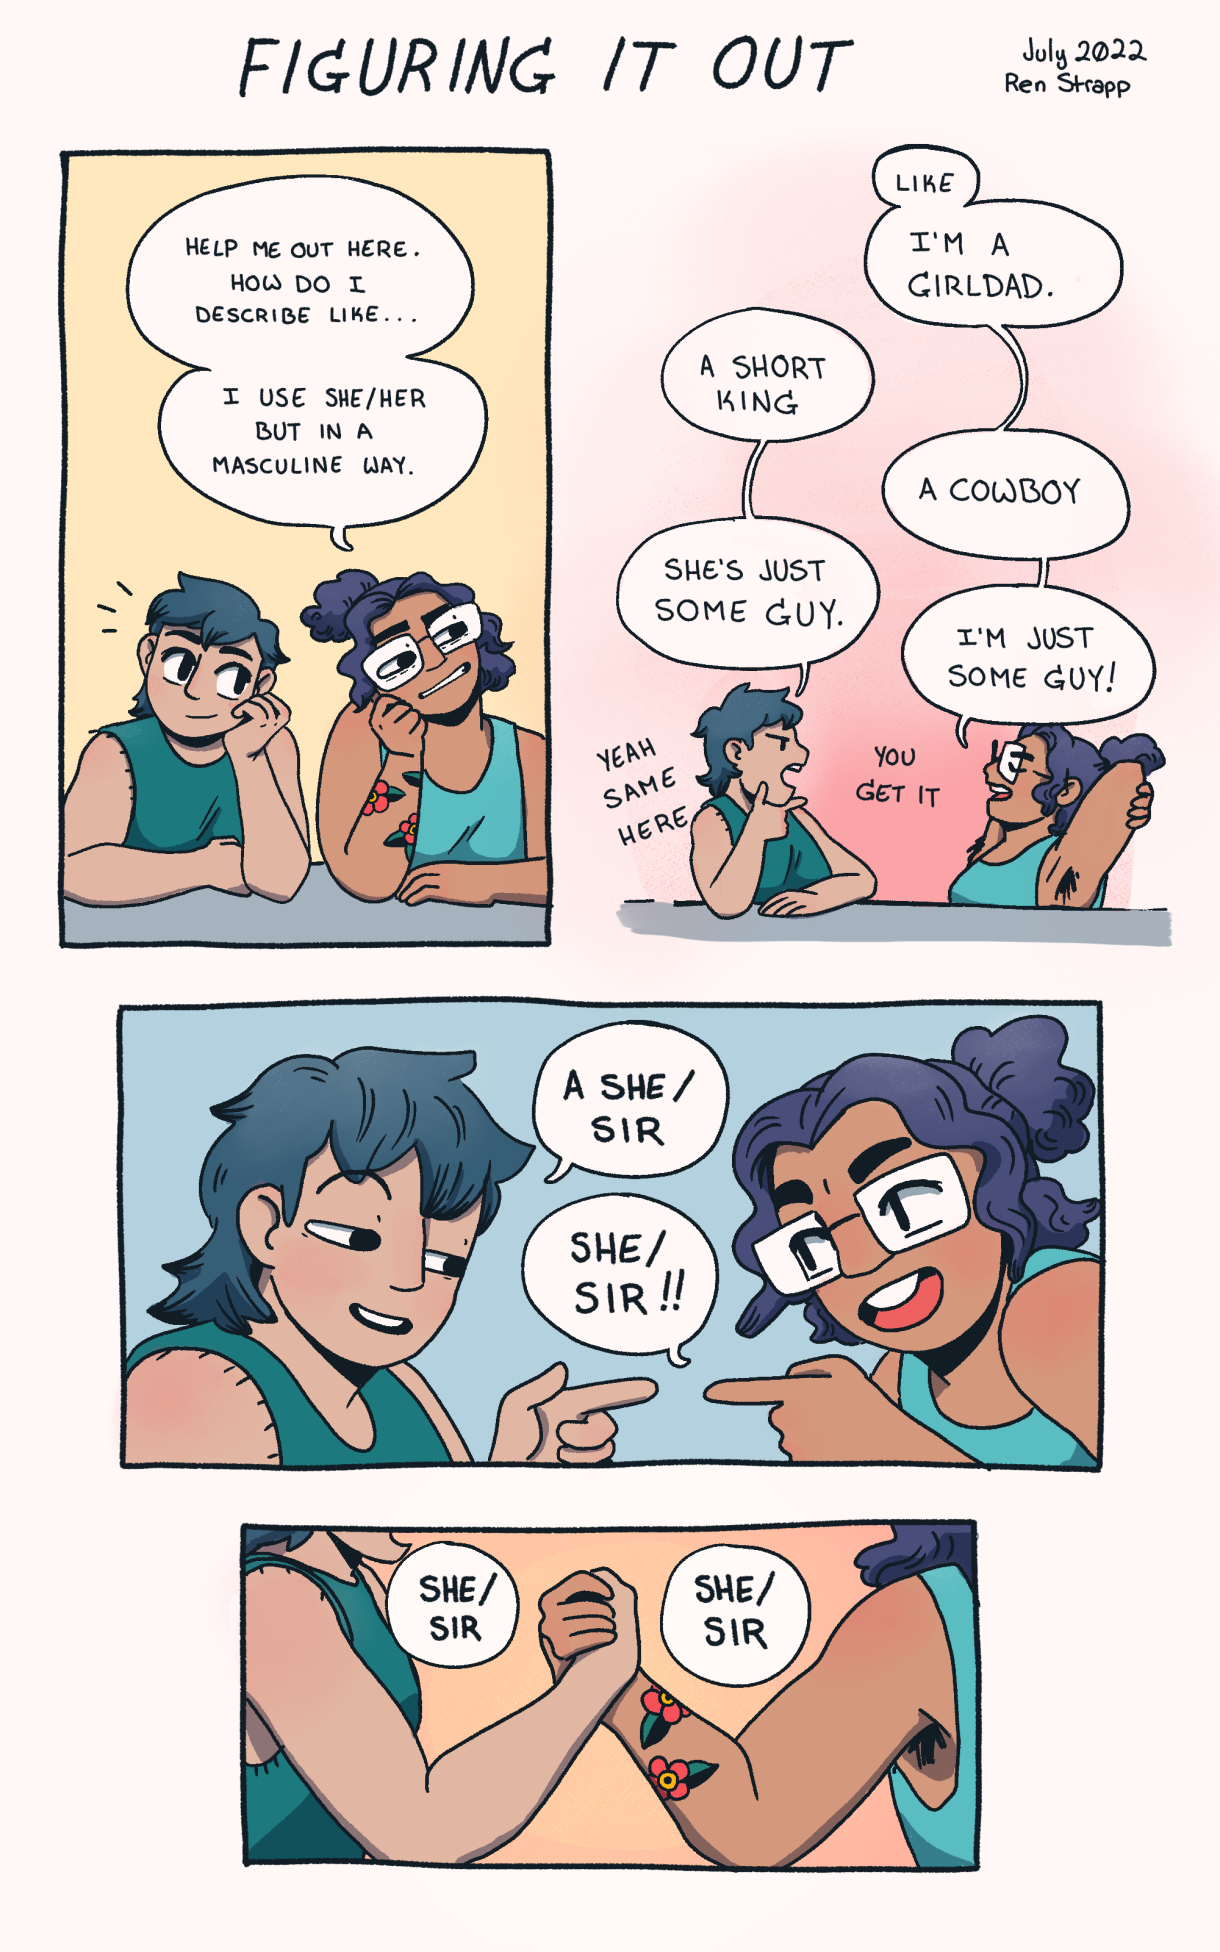 In a four panel comic in rosy colored pastels, two friends try to work out their pronouns. Both friends are people of color, one has a blue mullet and one has dark curly hair in a ponytail and glasses. The friend in glasses asks, "Help me out here. How do I describe like… I use she/her but in a masculine way." The friends brainstorm options, "A short king. She’s just some guy.  I’m a girdled. A cowboy. I’m just some guy." before deciding on "A she/sir!" 